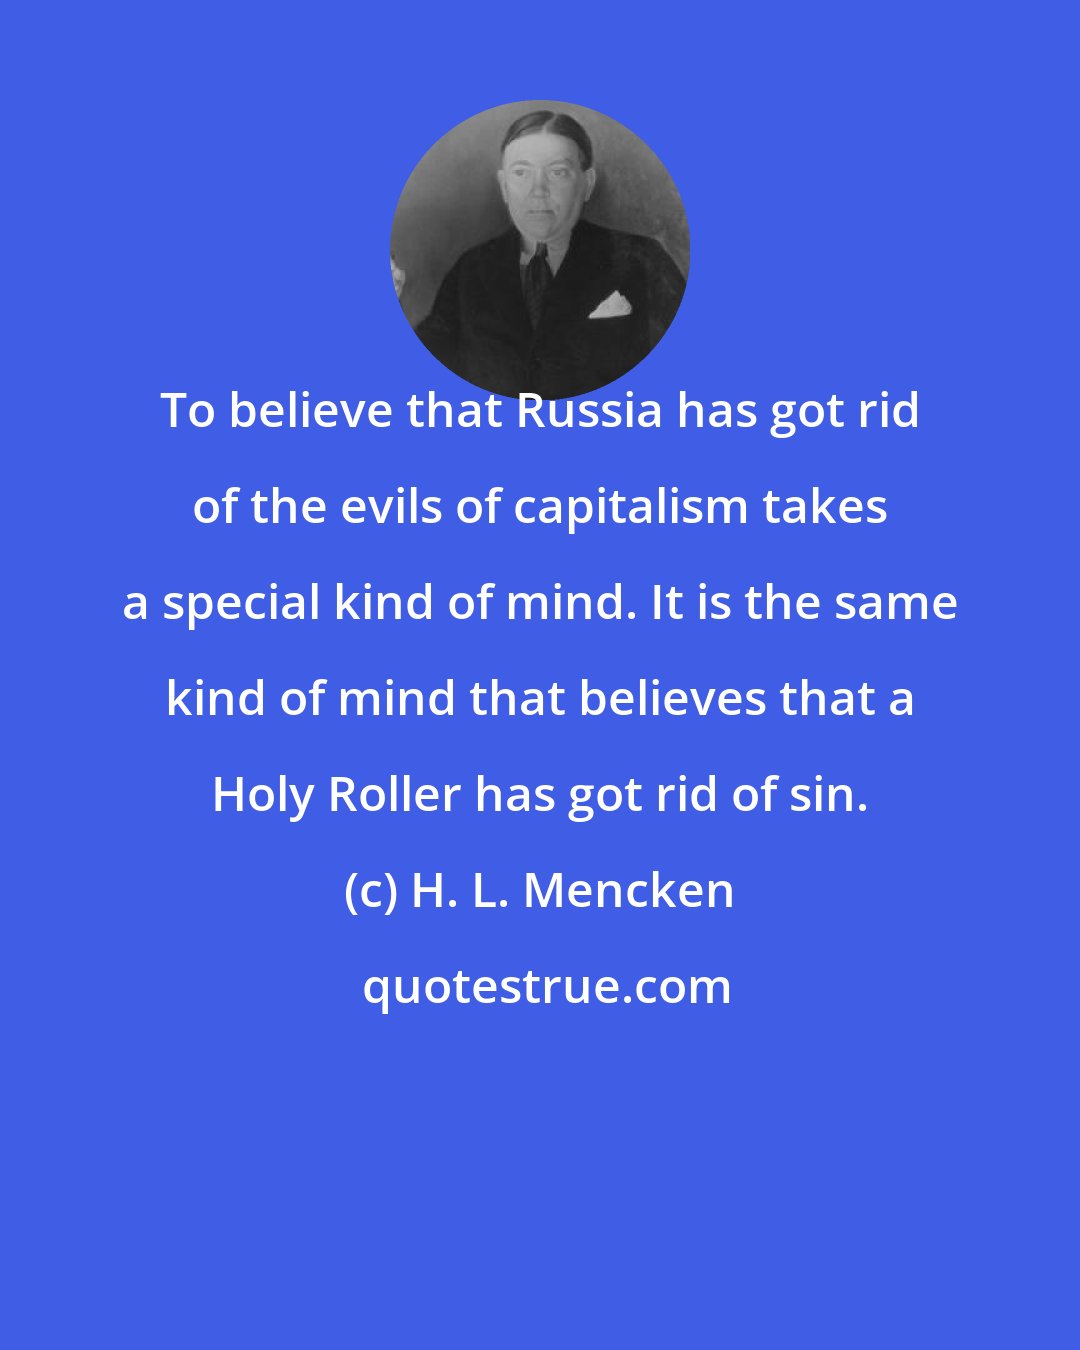 H. L. Mencken: To believe that Russia has got rid of the evils of capitalism takes a special kind of mind. It is the same kind of mind that believes that a Holy Roller has got rid of sin.